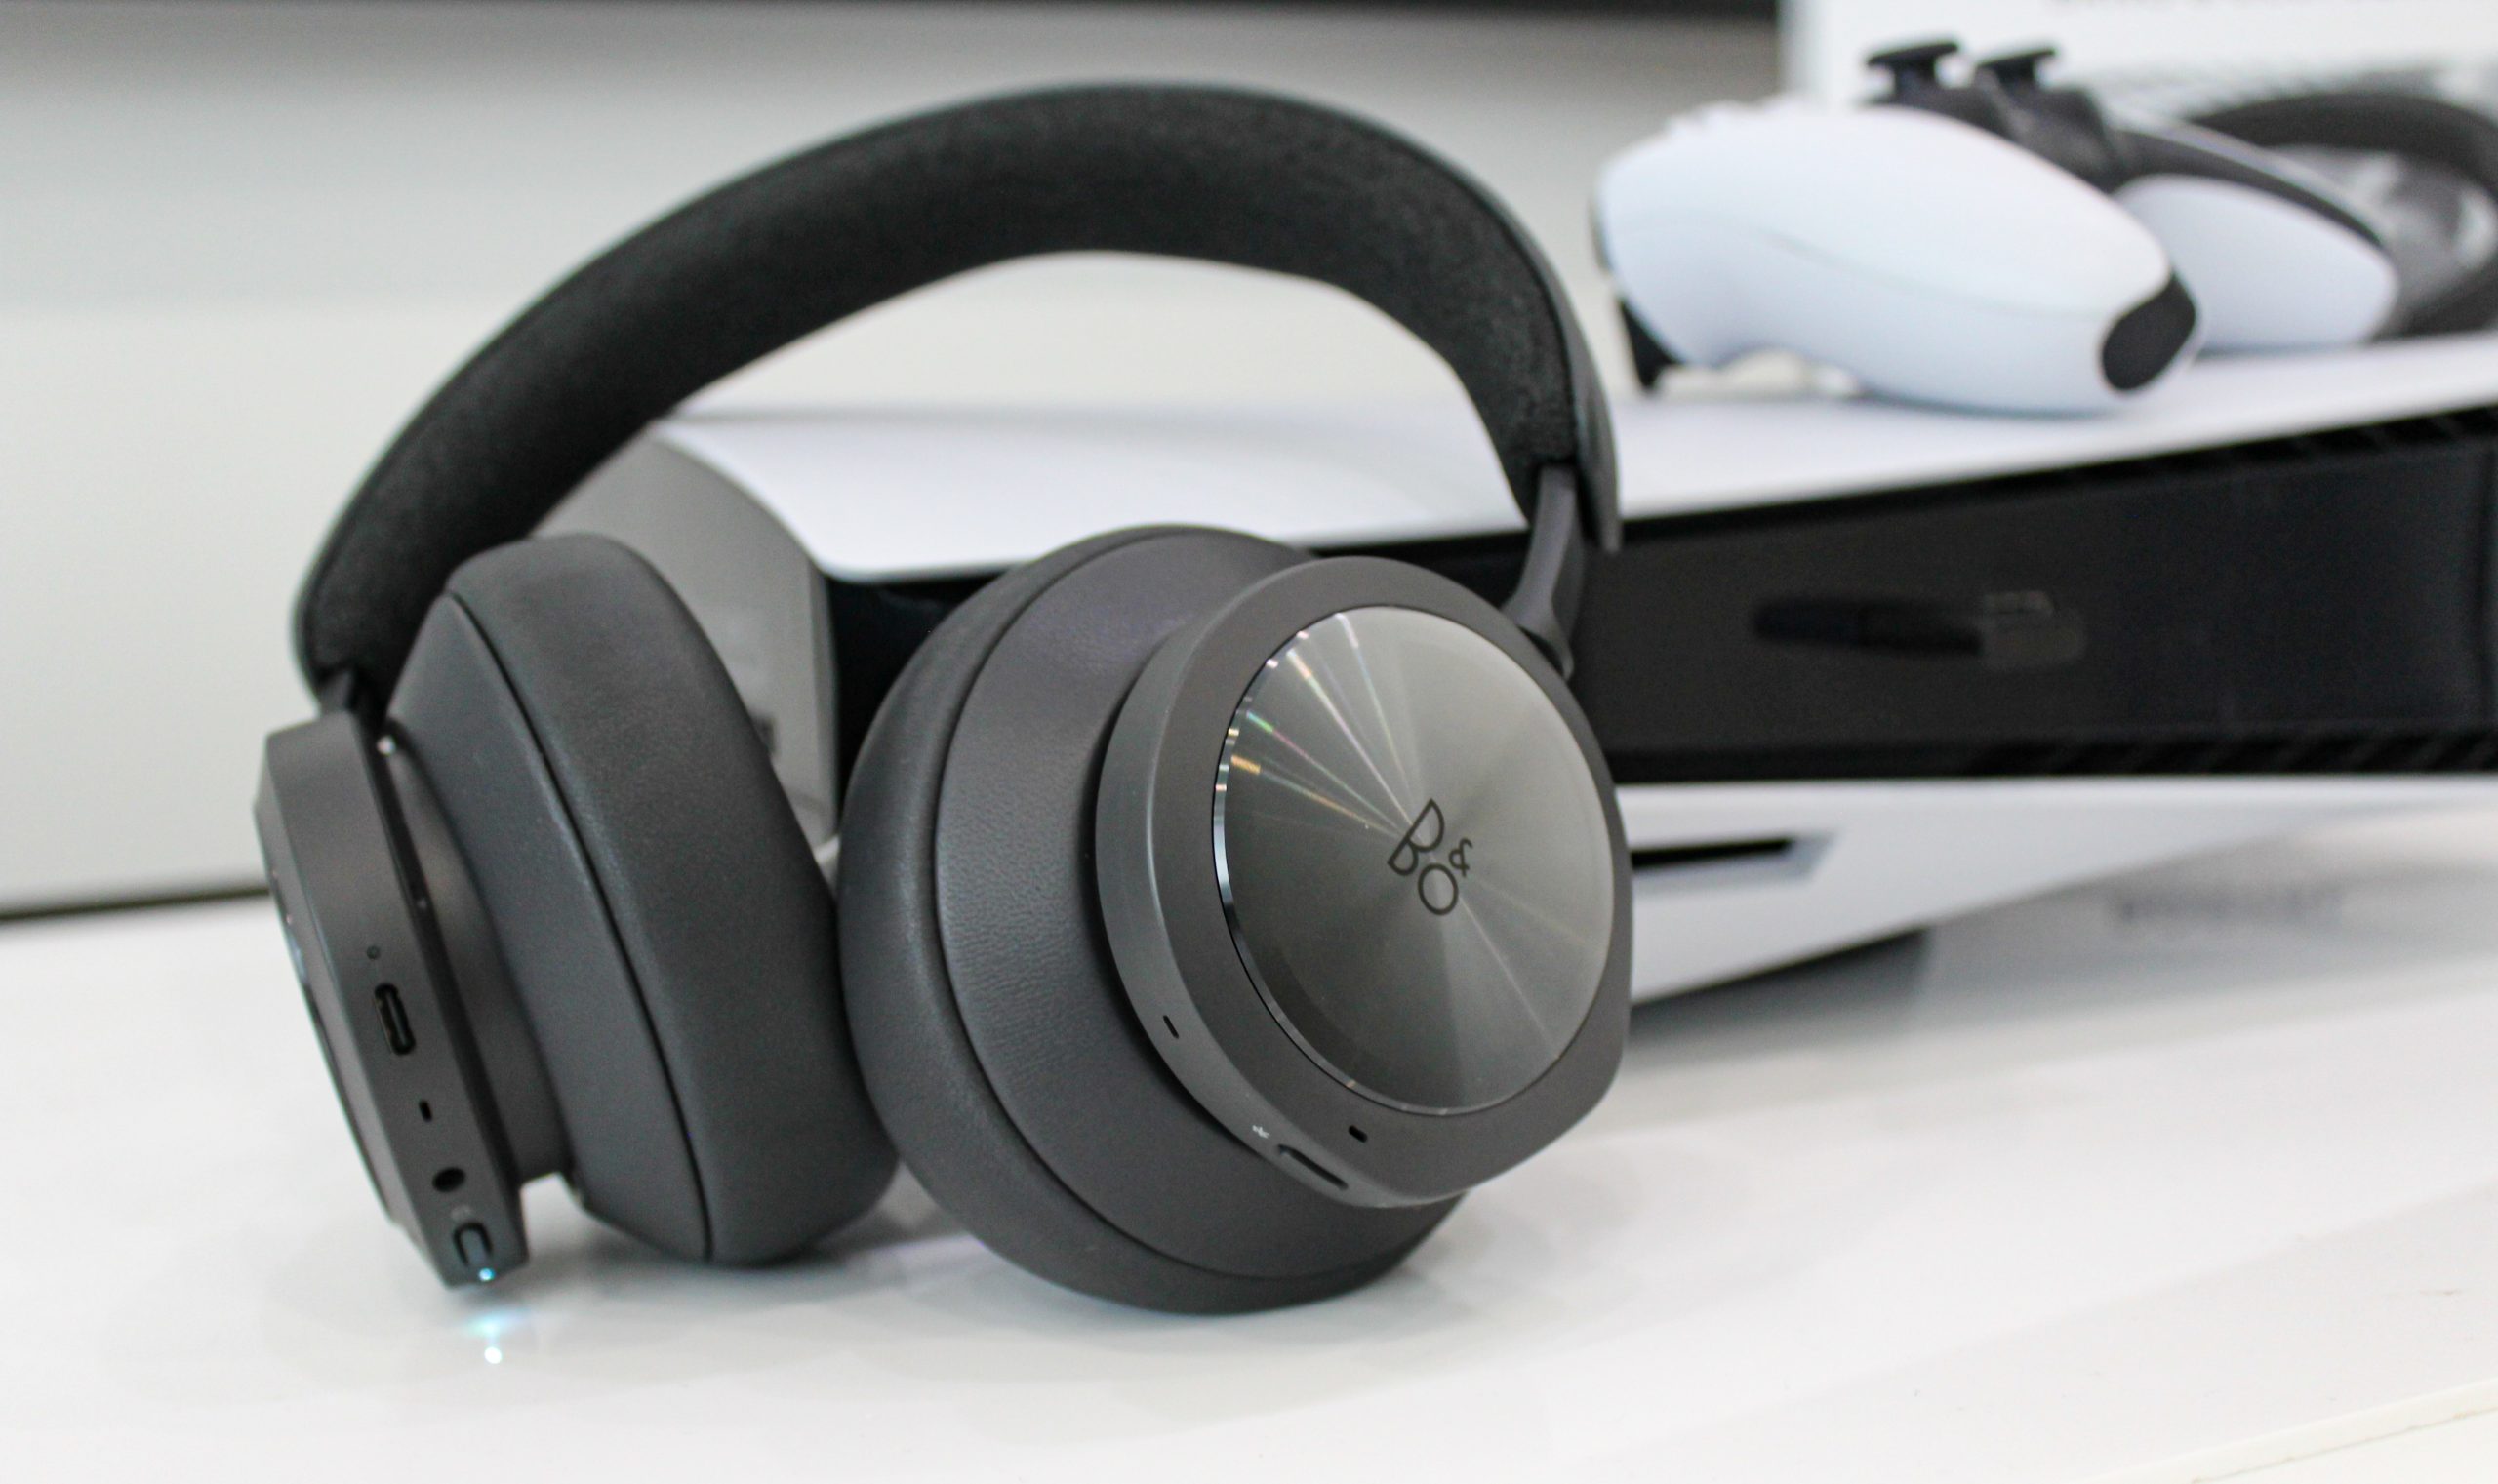 Bang & Olufsen Beoplay Portal PS5/PC: the best hybrid headphones